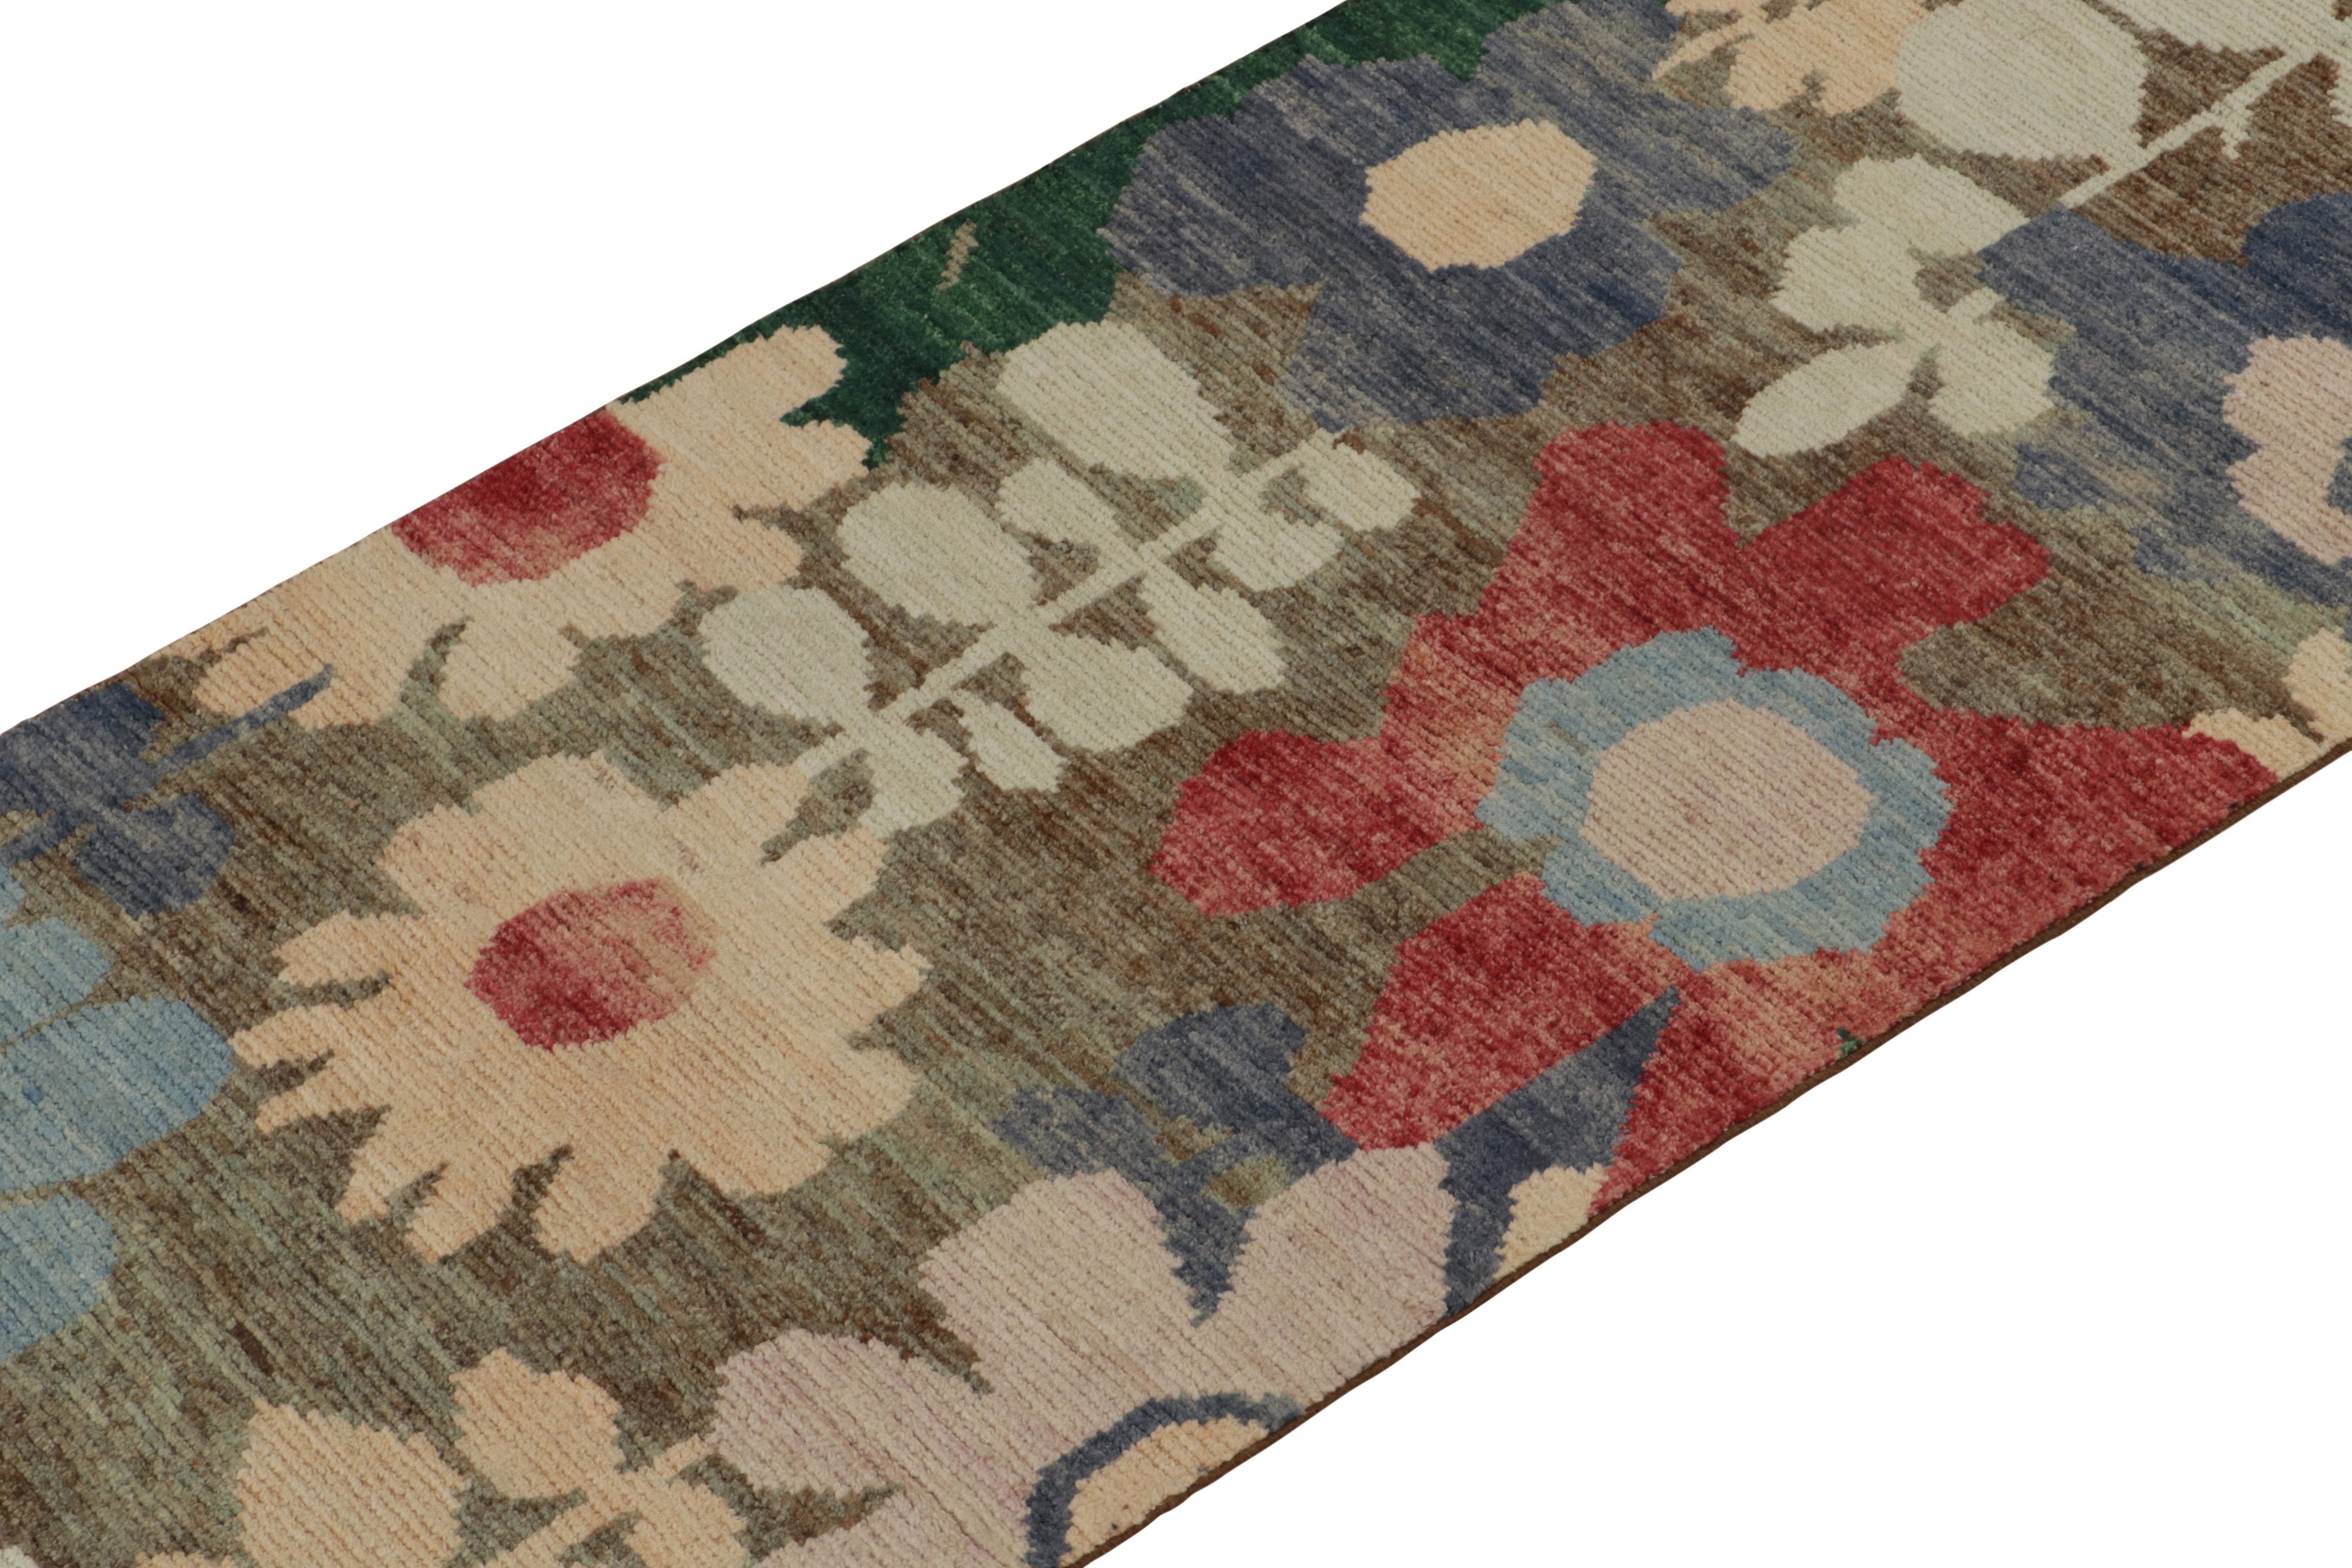 Hand-knotted in wool, a 3×10 runner from the latest unveilings of Rug & Kilim’s New & Modern Collection. This refreshing piece enjoys multicolor florals for a playful, almost impressionist take on botanical designs. The thoughtful play of blue,